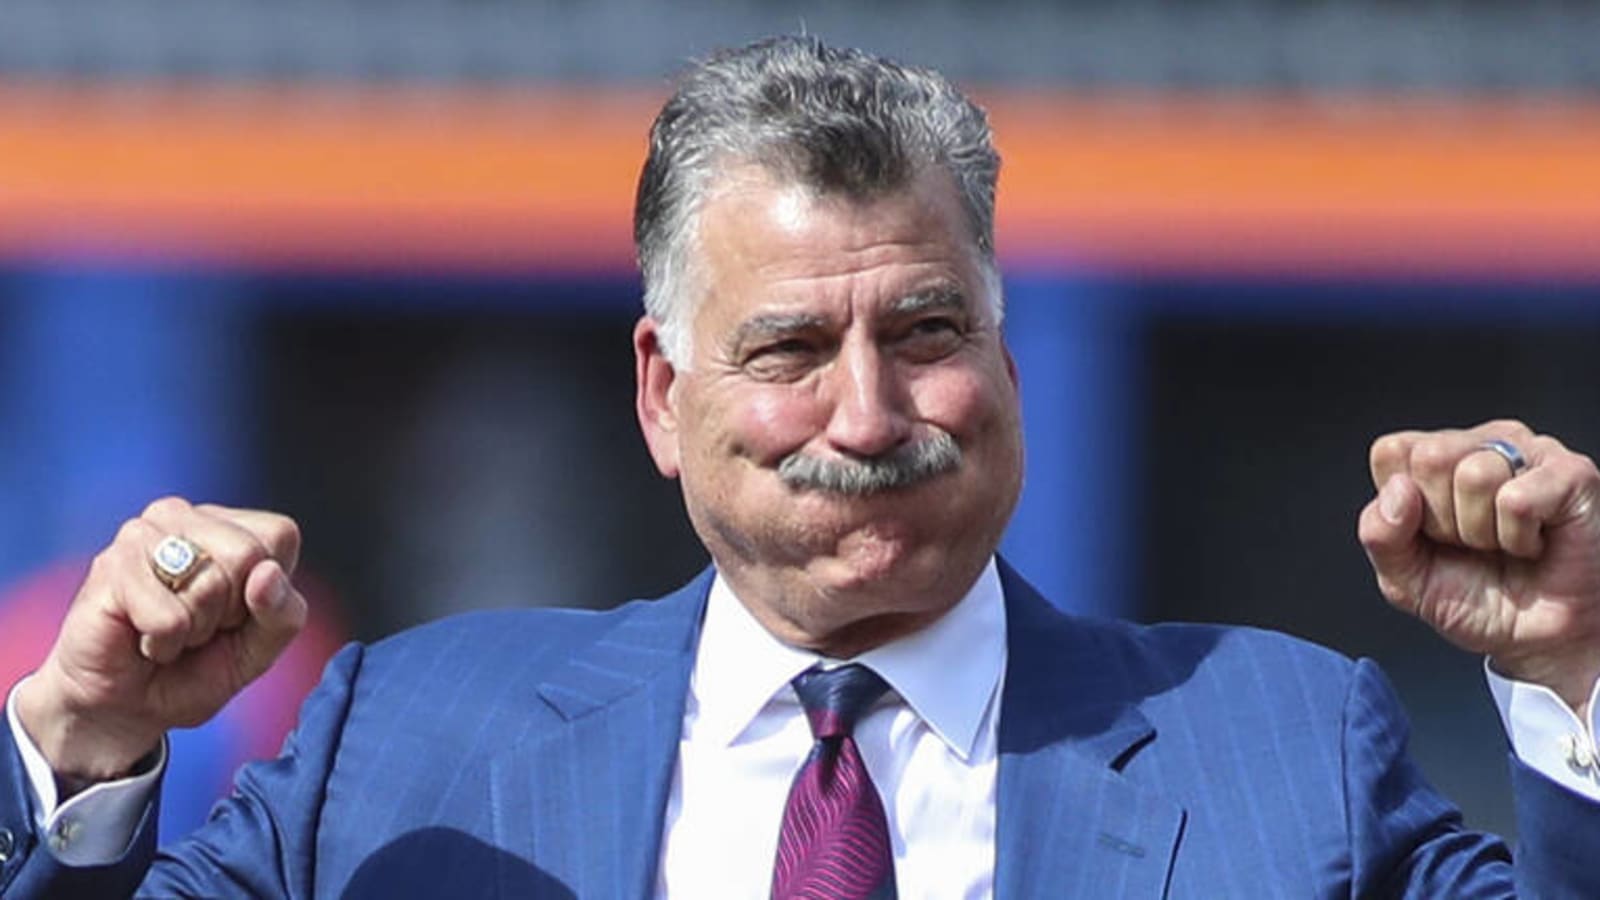 Keith Hernandez's #17 Retired by the Mets, history, Cadillac, New York Mets, From this moment on, #17 is forever enshrined in Mets history.  Congratulations to Keith Hernandez. ➡️ Cadillac, By SNY